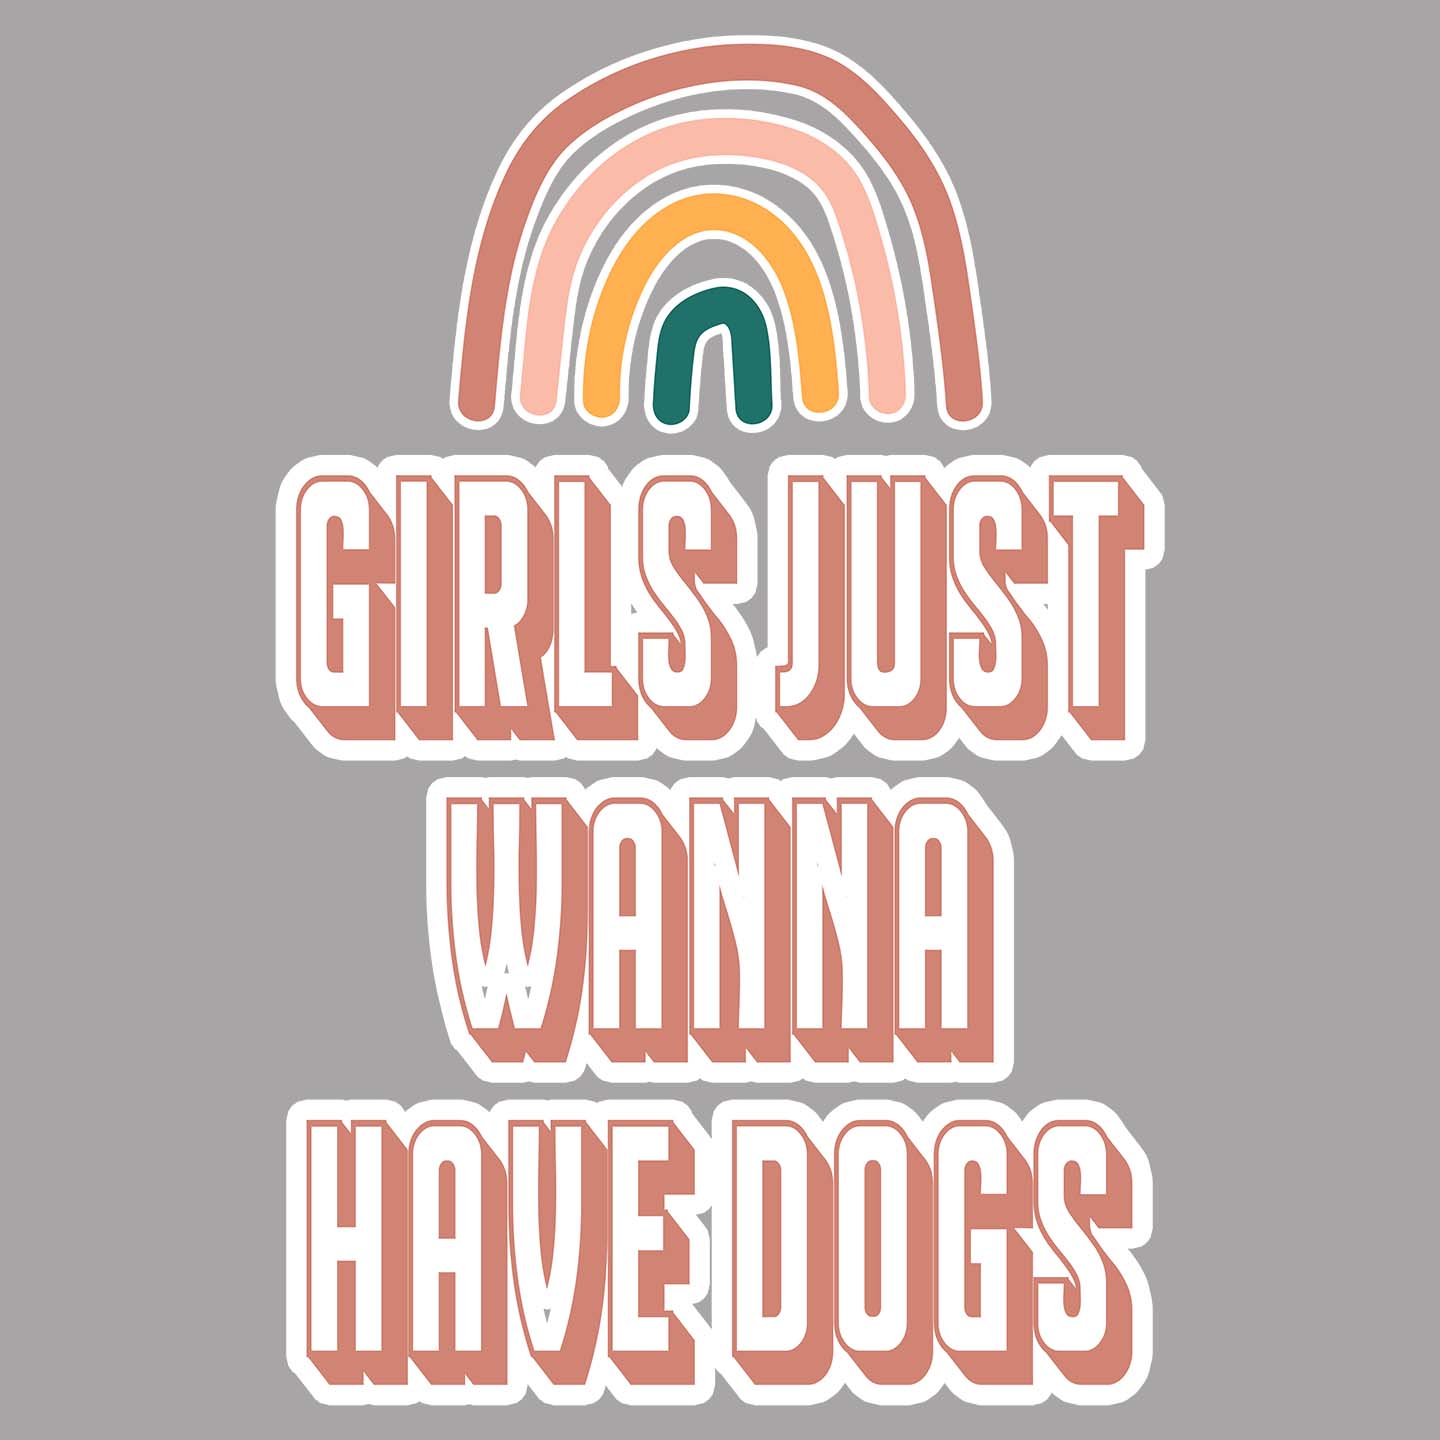 Girls Just Wanna Have Dogs - Women's V-Neck T-Shirt